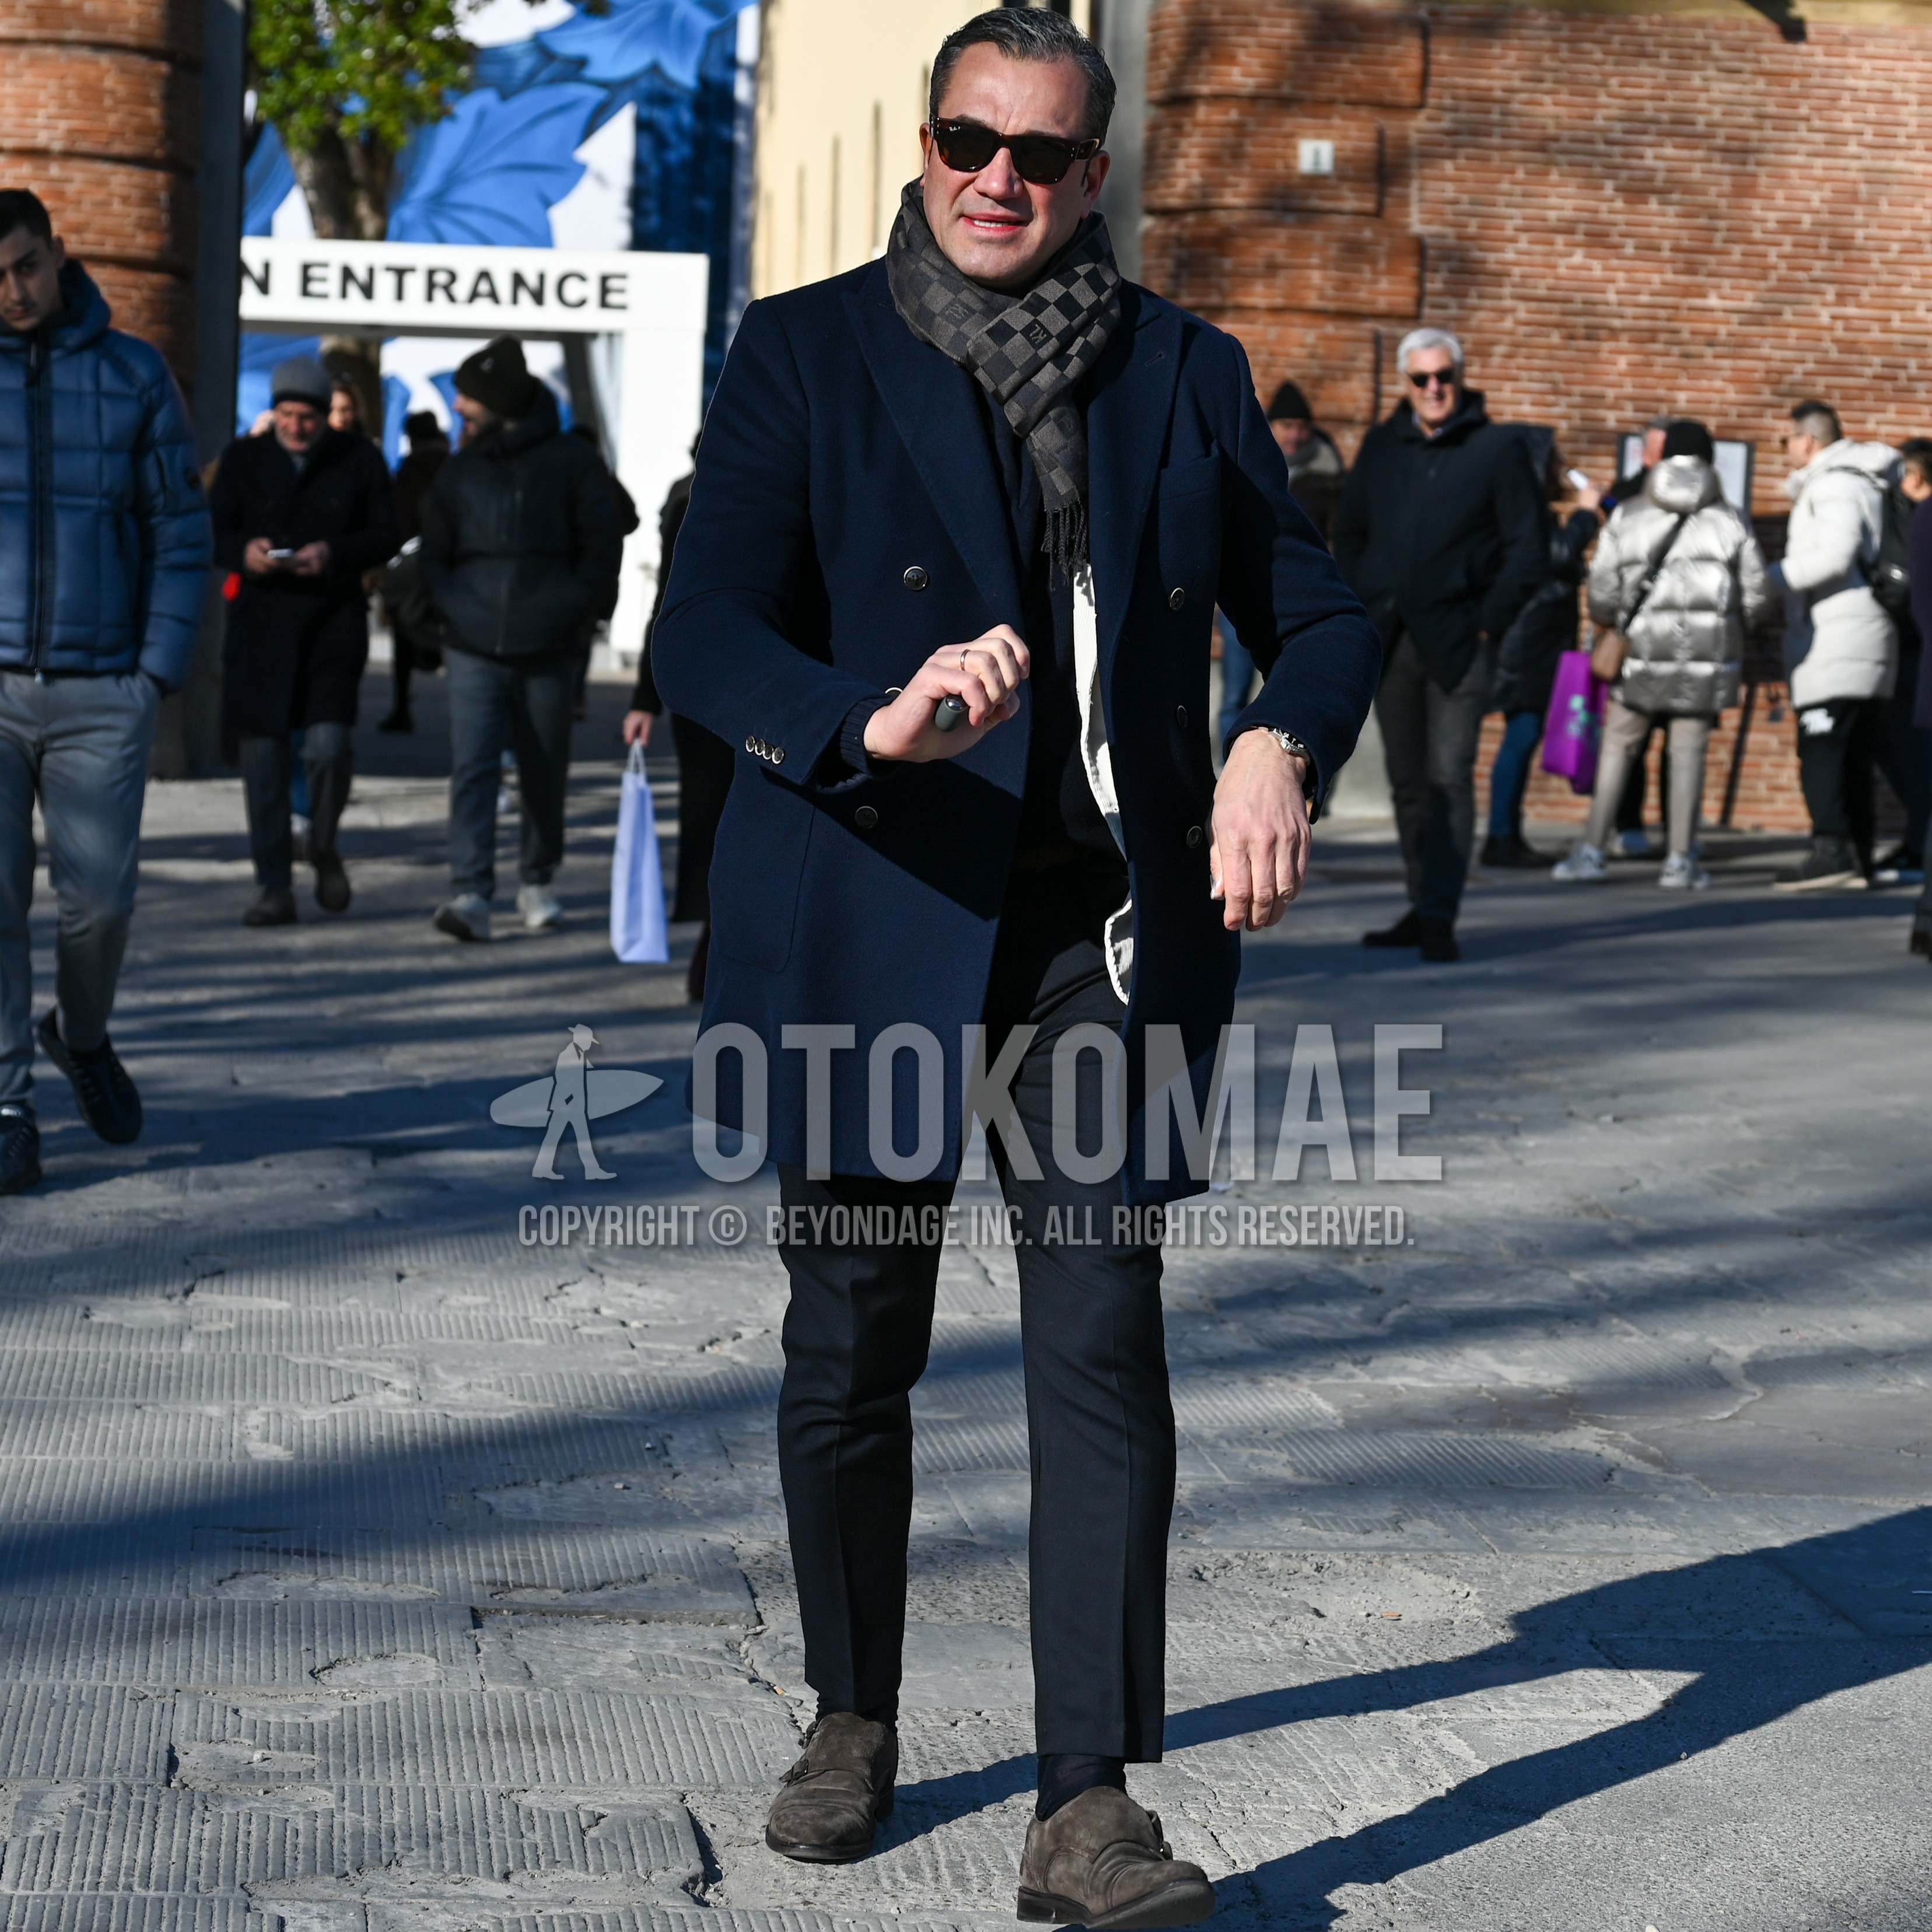 Men's spring autumn winter outfit with black plain sunglasses, gray black check scarf, navy plain tailored jacket, navy plain slacks, black plain socks, gray tassel loafers leather shoes.